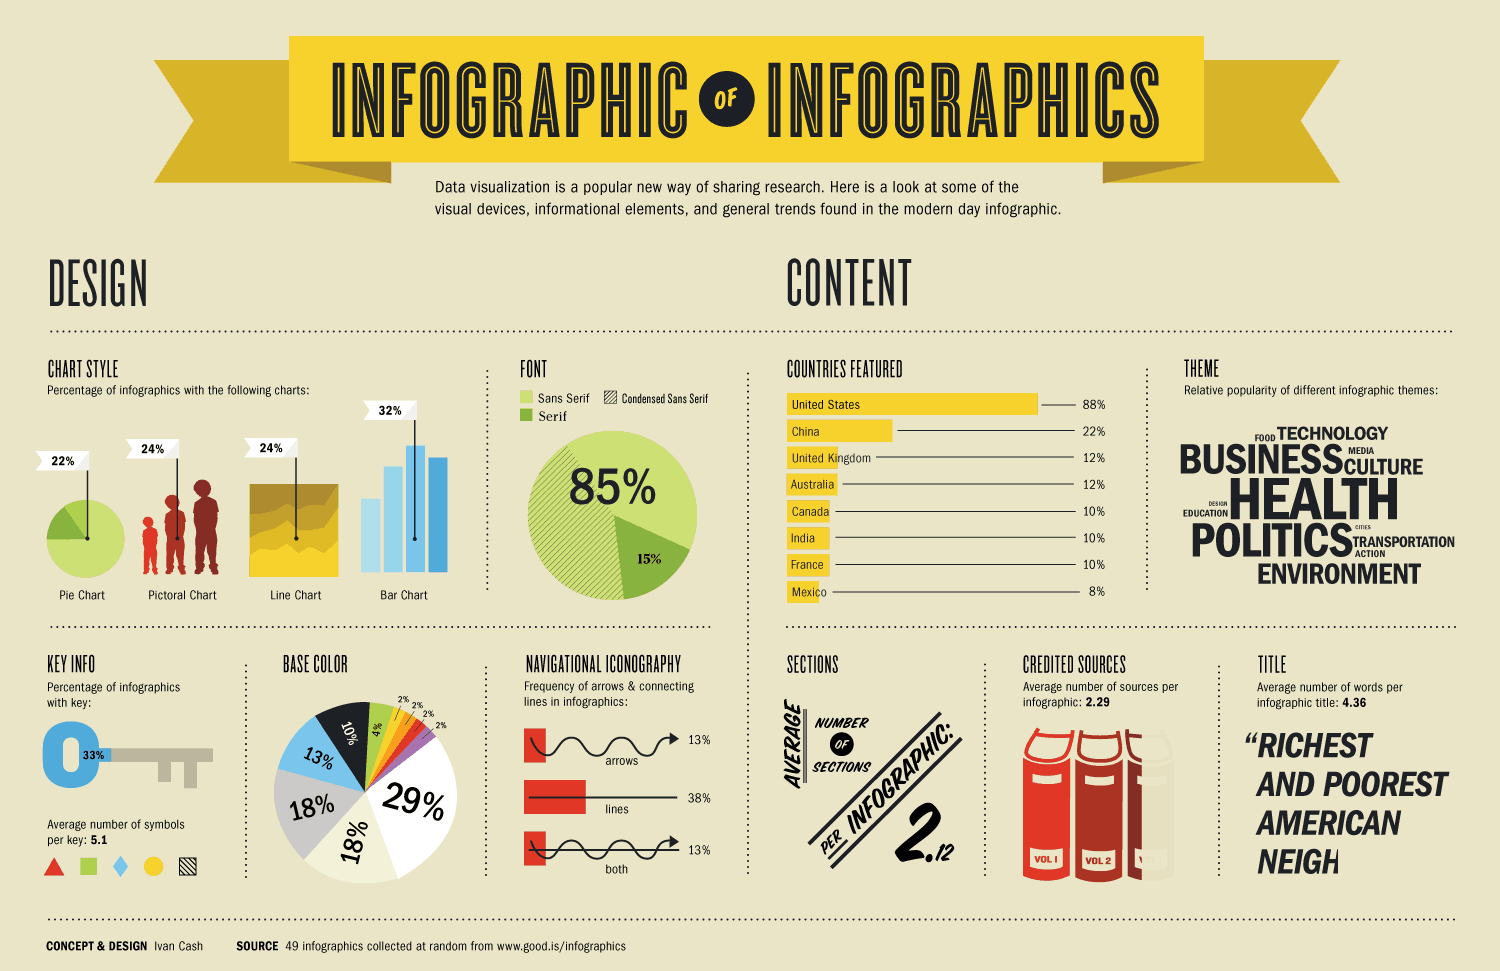 How Good are Infographics for Links?